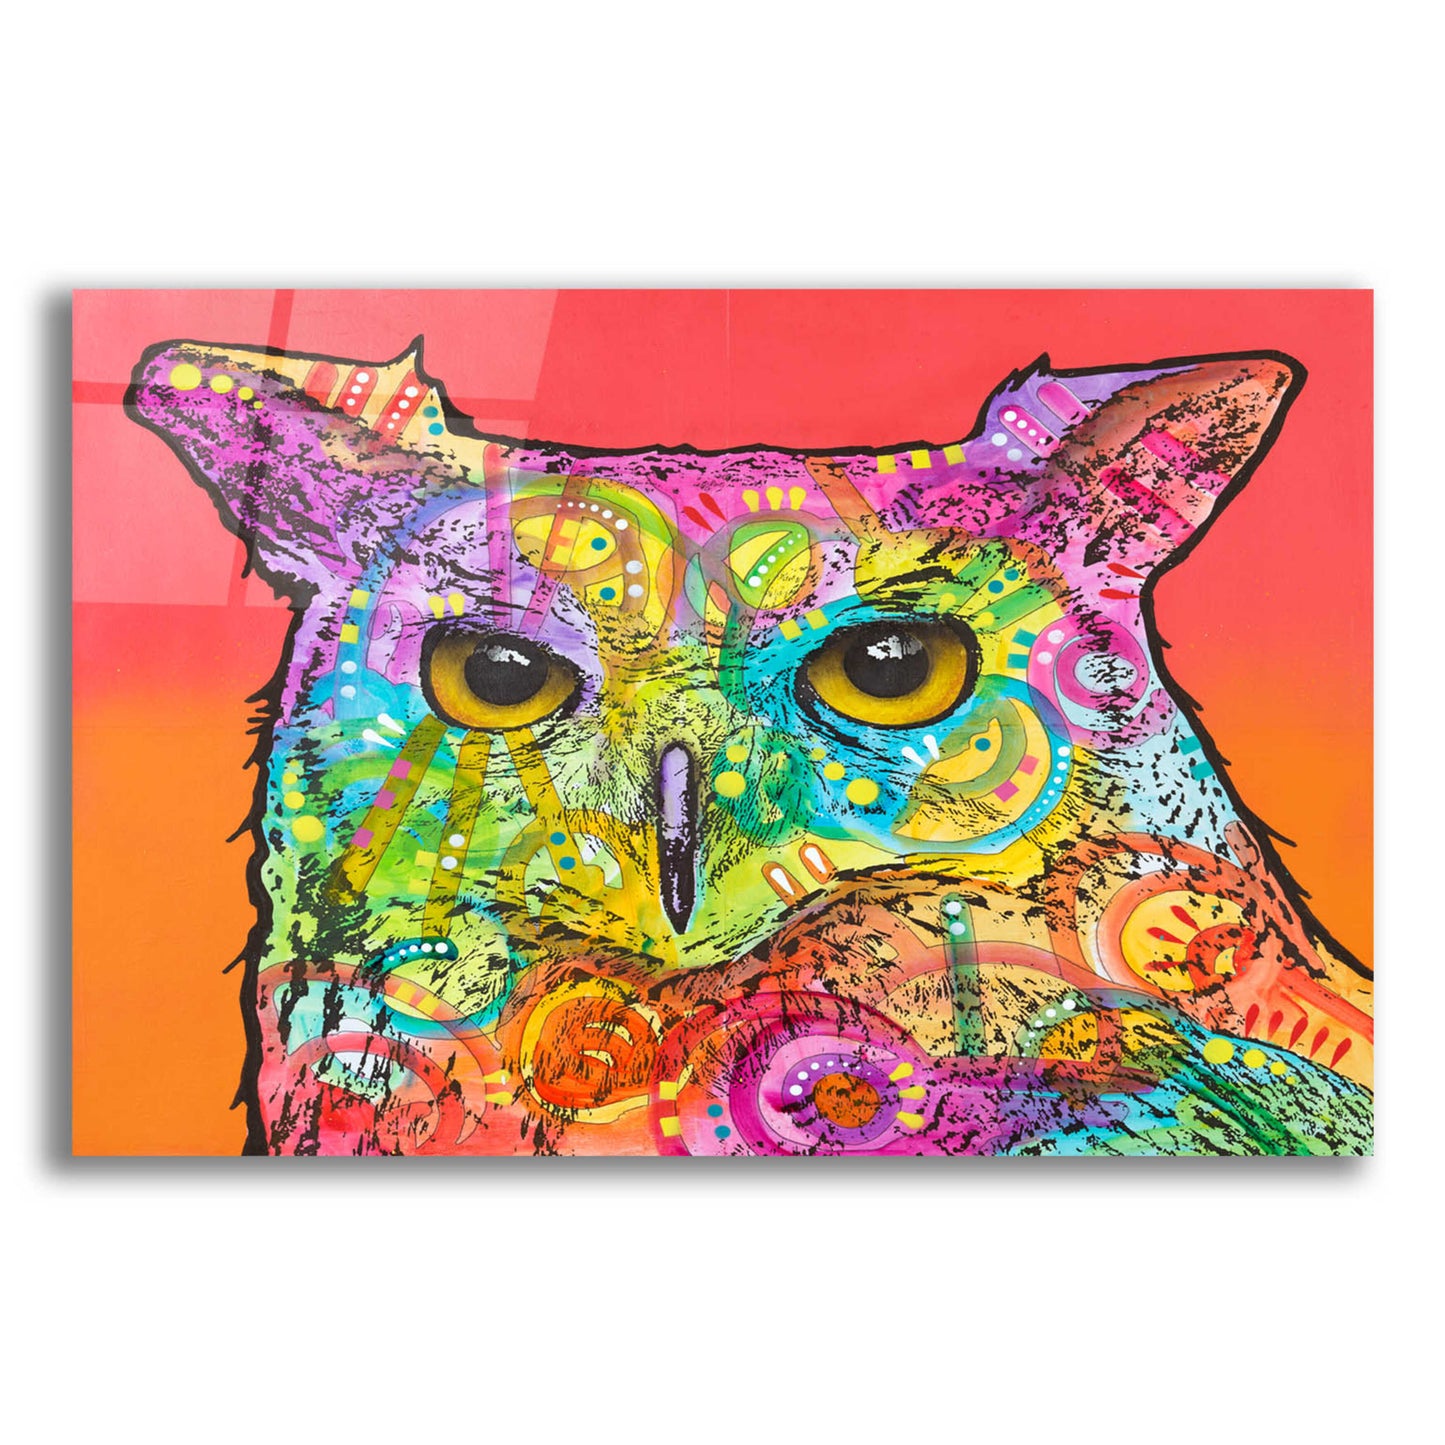 Epic Art 'Red Owl' by Dean Russo, Acrylic Glass Wall Art,24x16